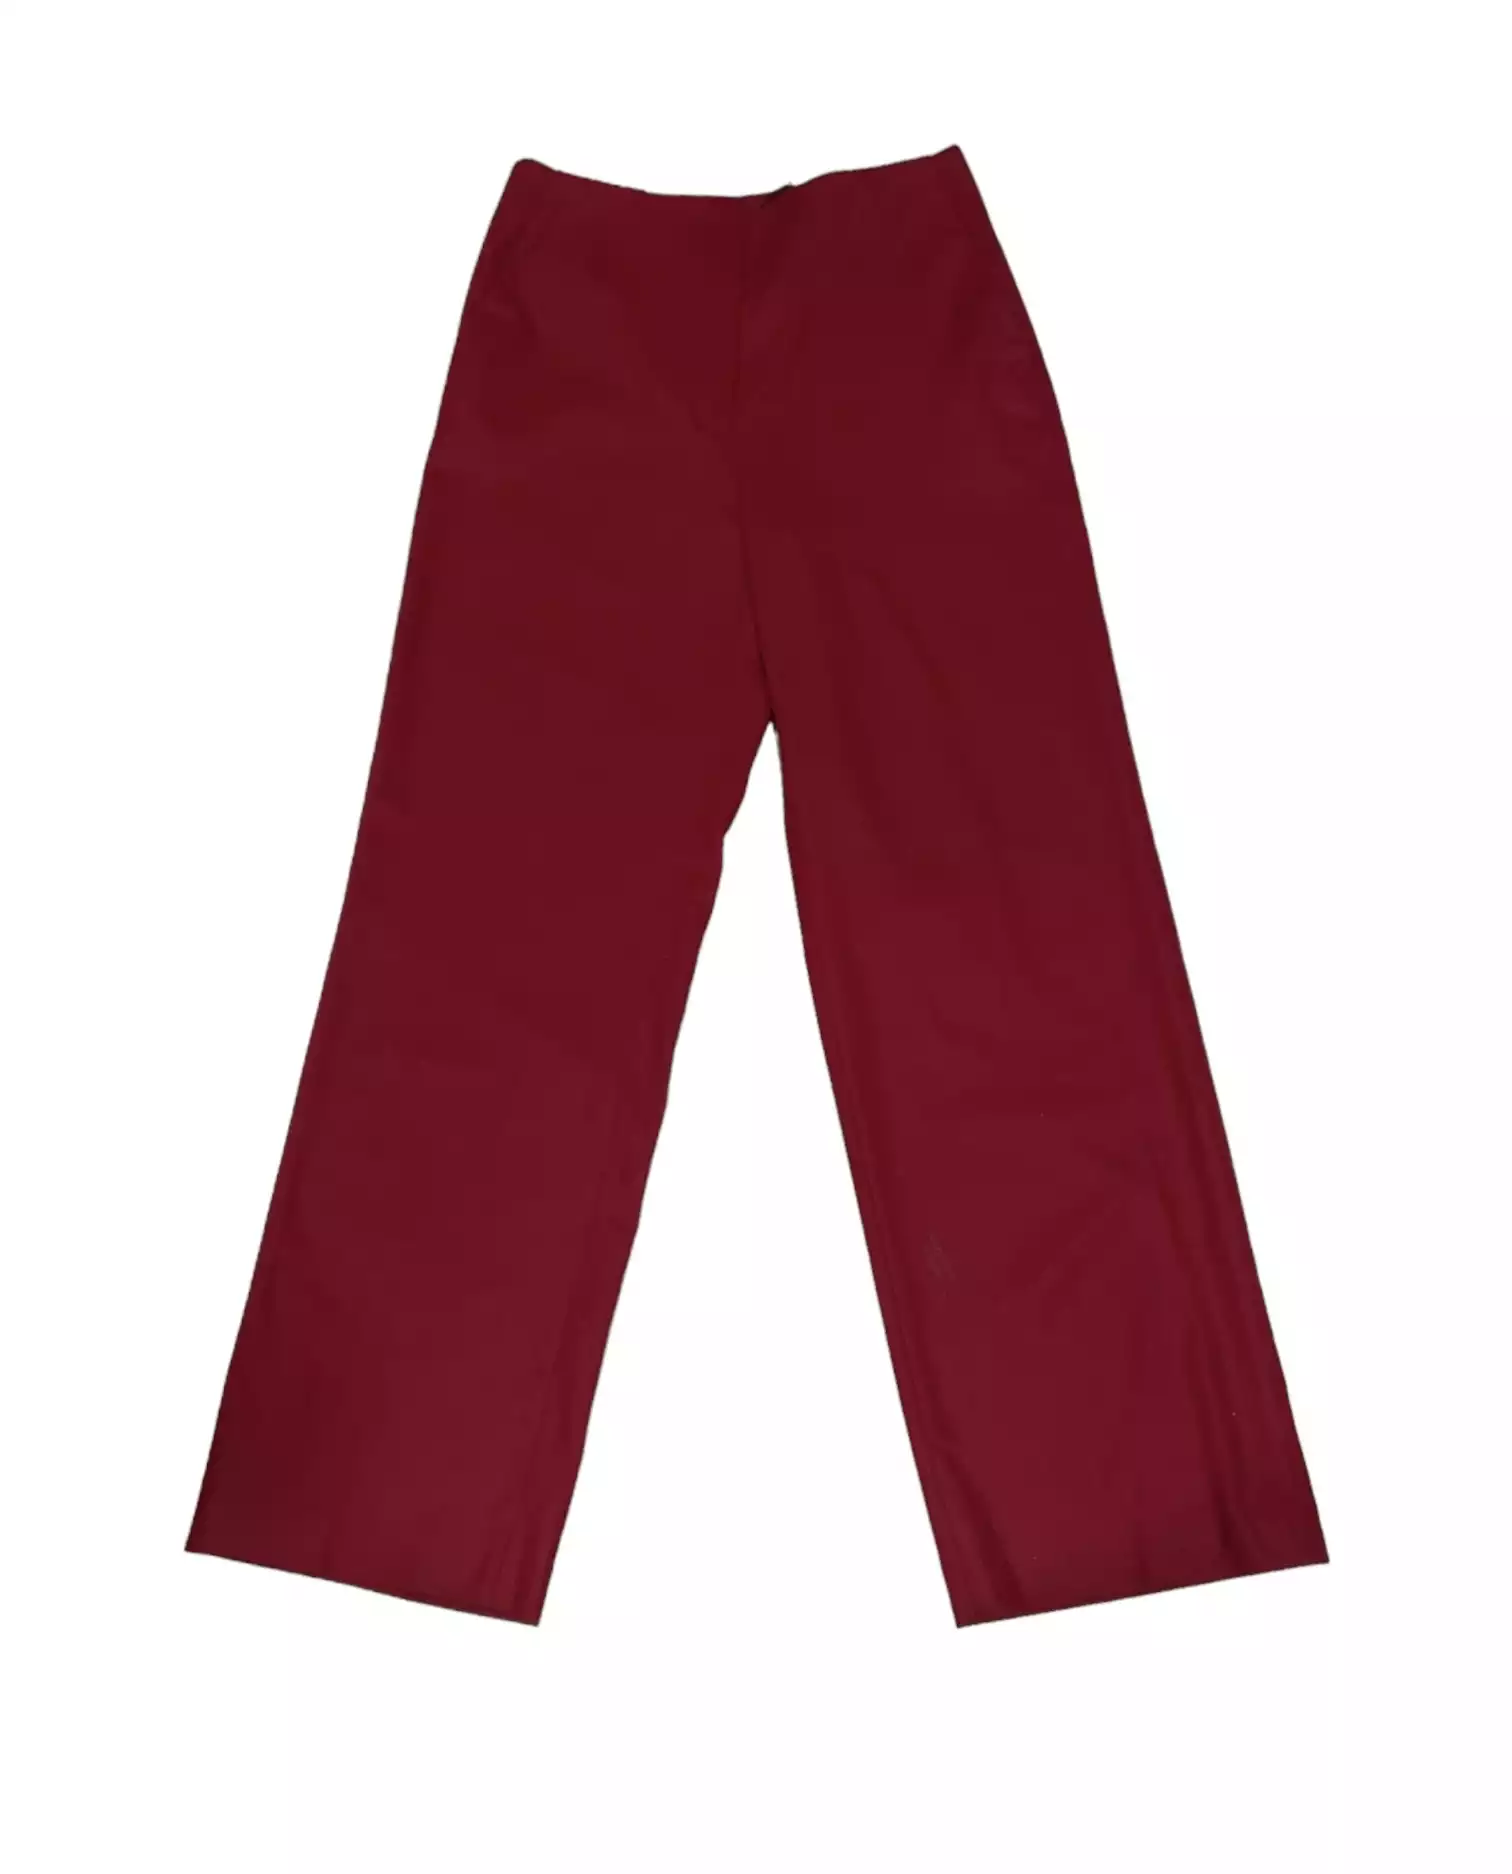 TROUSERS BY MASSIMO DUTTI